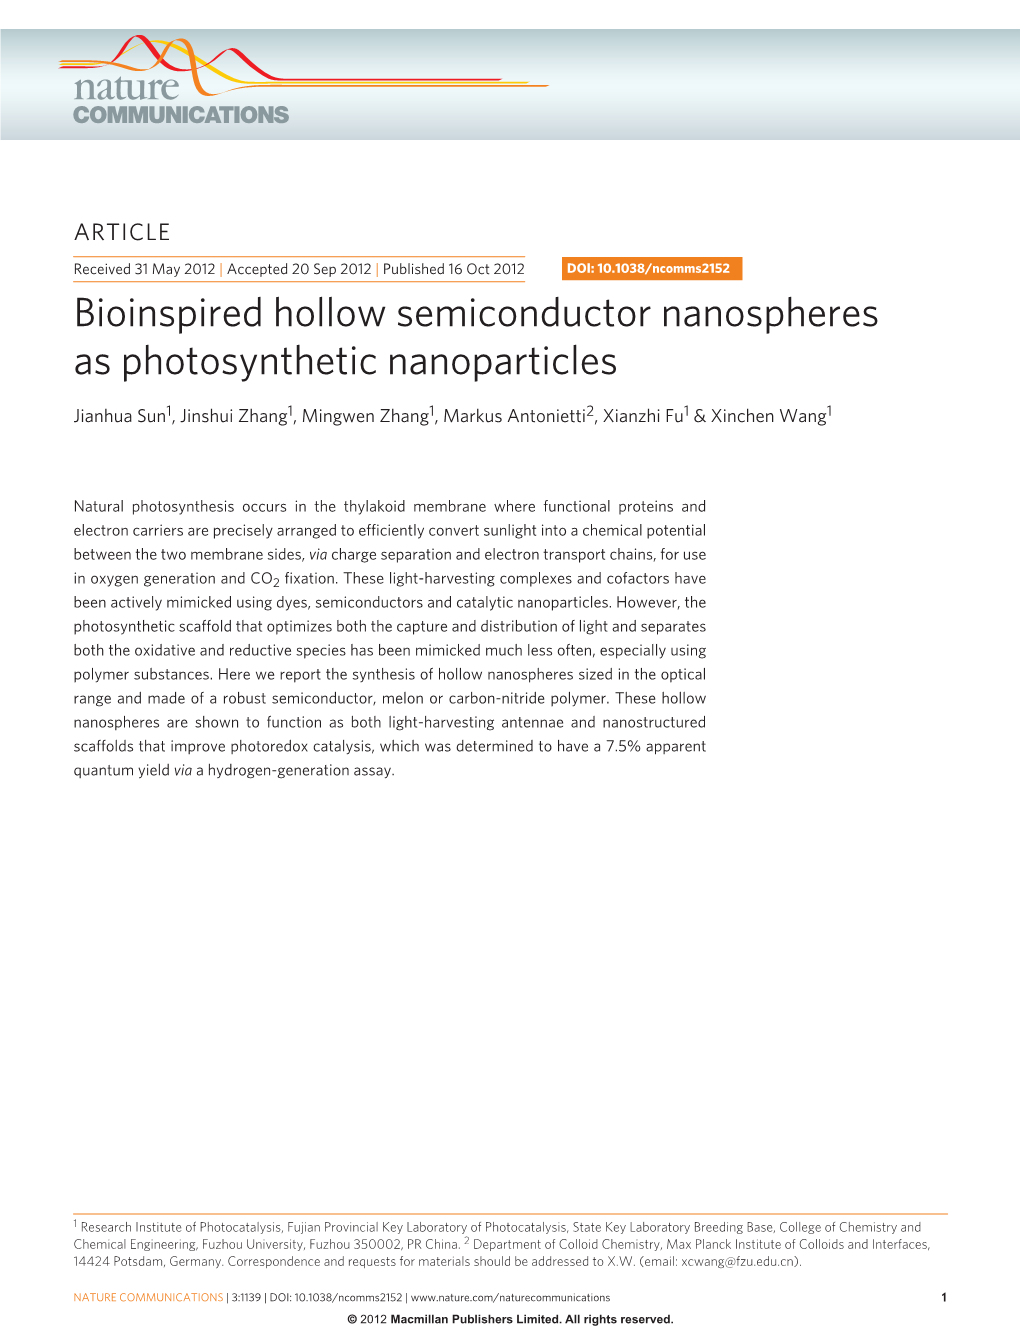 Bioinspired Hollow Semiconductor Nanospheres As Photosynthetic Nanoparticles